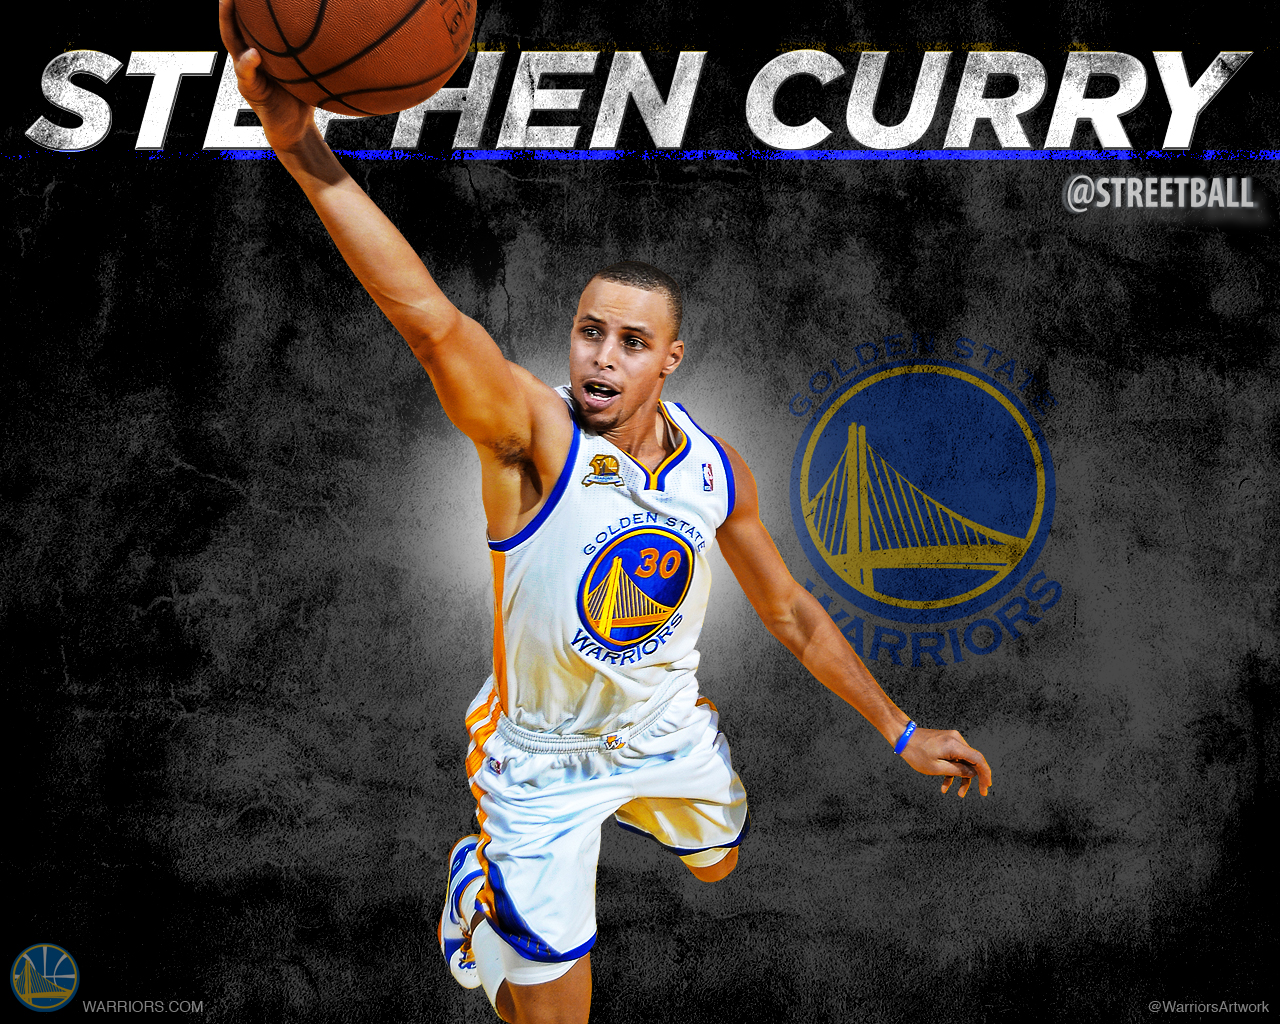 Wallpaper Of Stephen Curry Best HD Wallapers